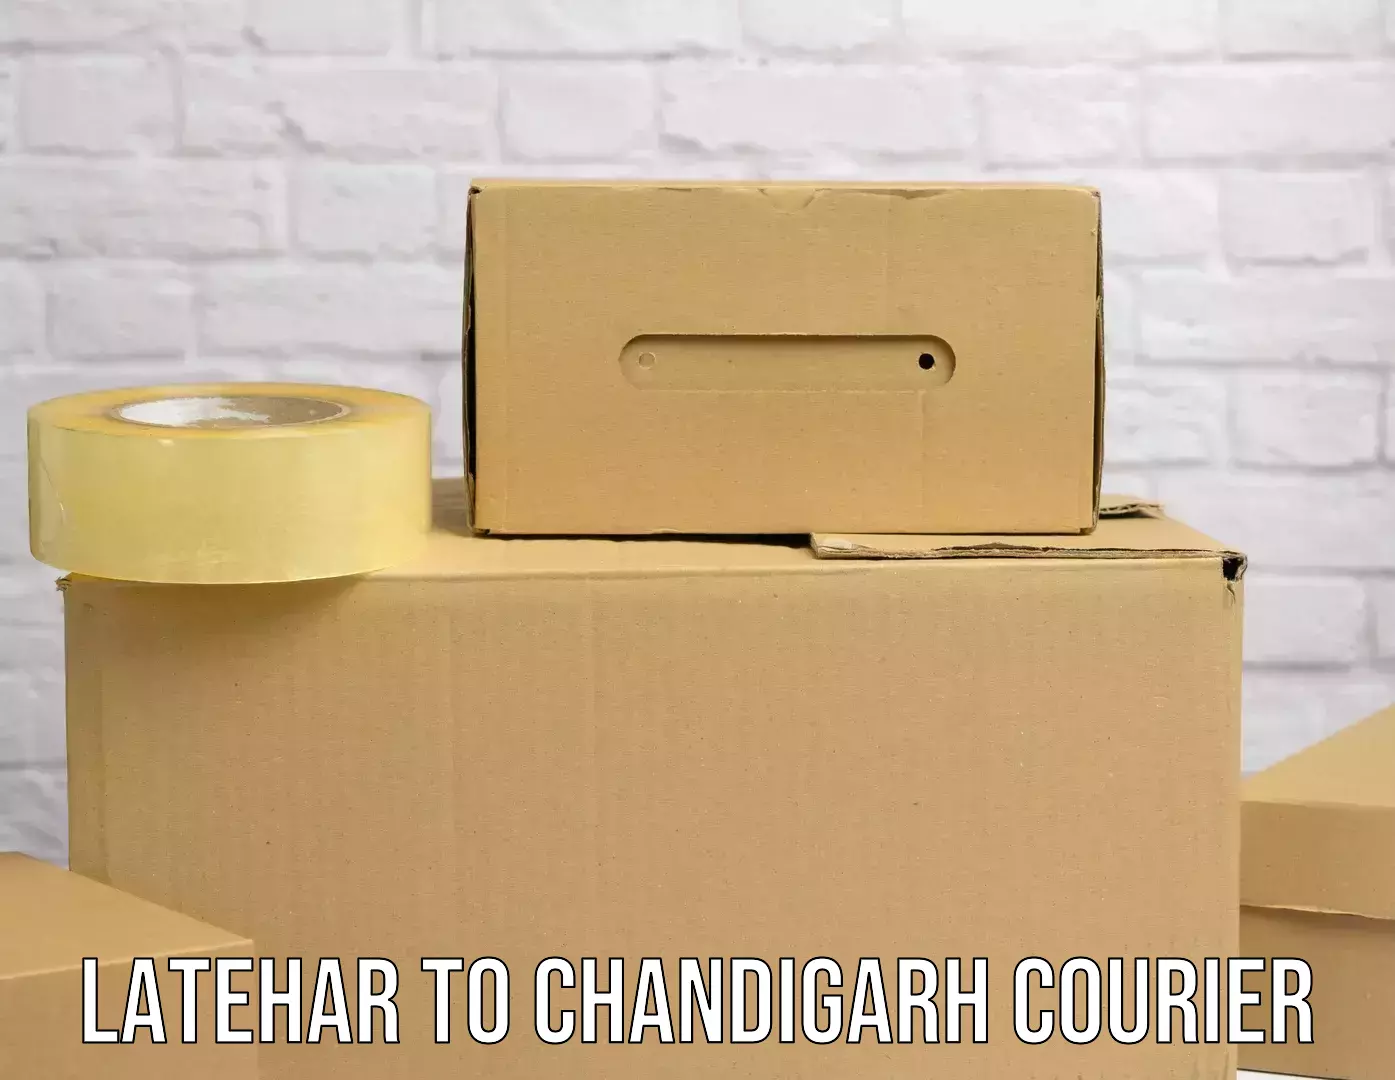 Cost-effective courier solutions Latehar to Chandigarh